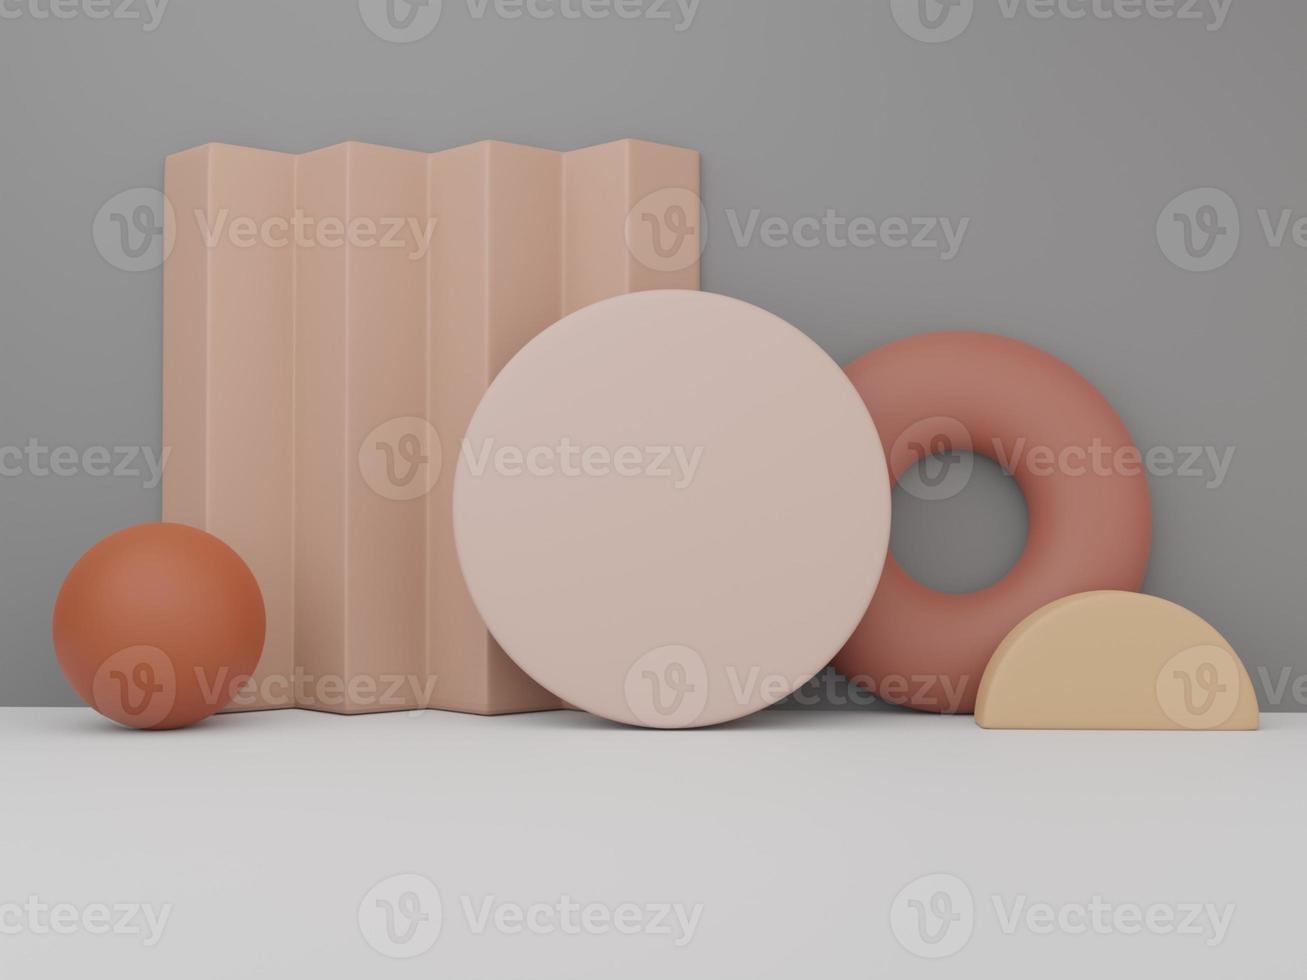 3D Rendering Minimal Geometric or Abstract Ceramics Puzzle or Jigsaw Blocks Product Display Background for Beauty or Fashionable Products. Multi Colors. photo